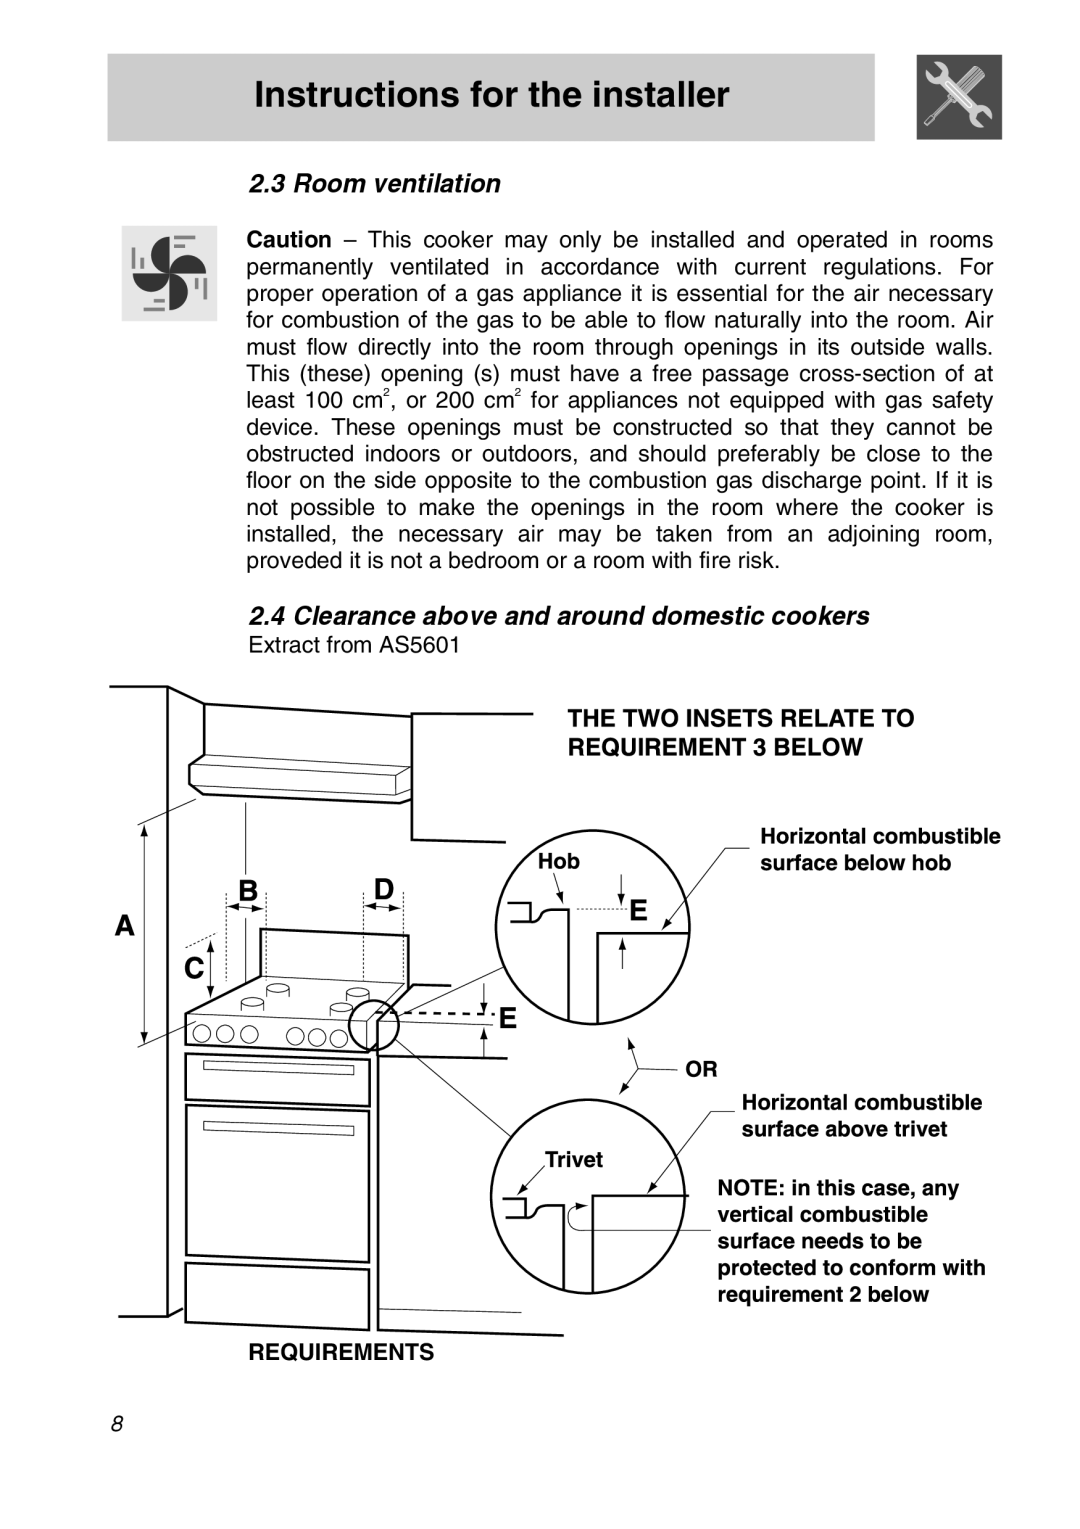 Smeg A11A-6 Instructions for the installer, Room ventilation, Clearance above and around domestic cookers, Requirements 